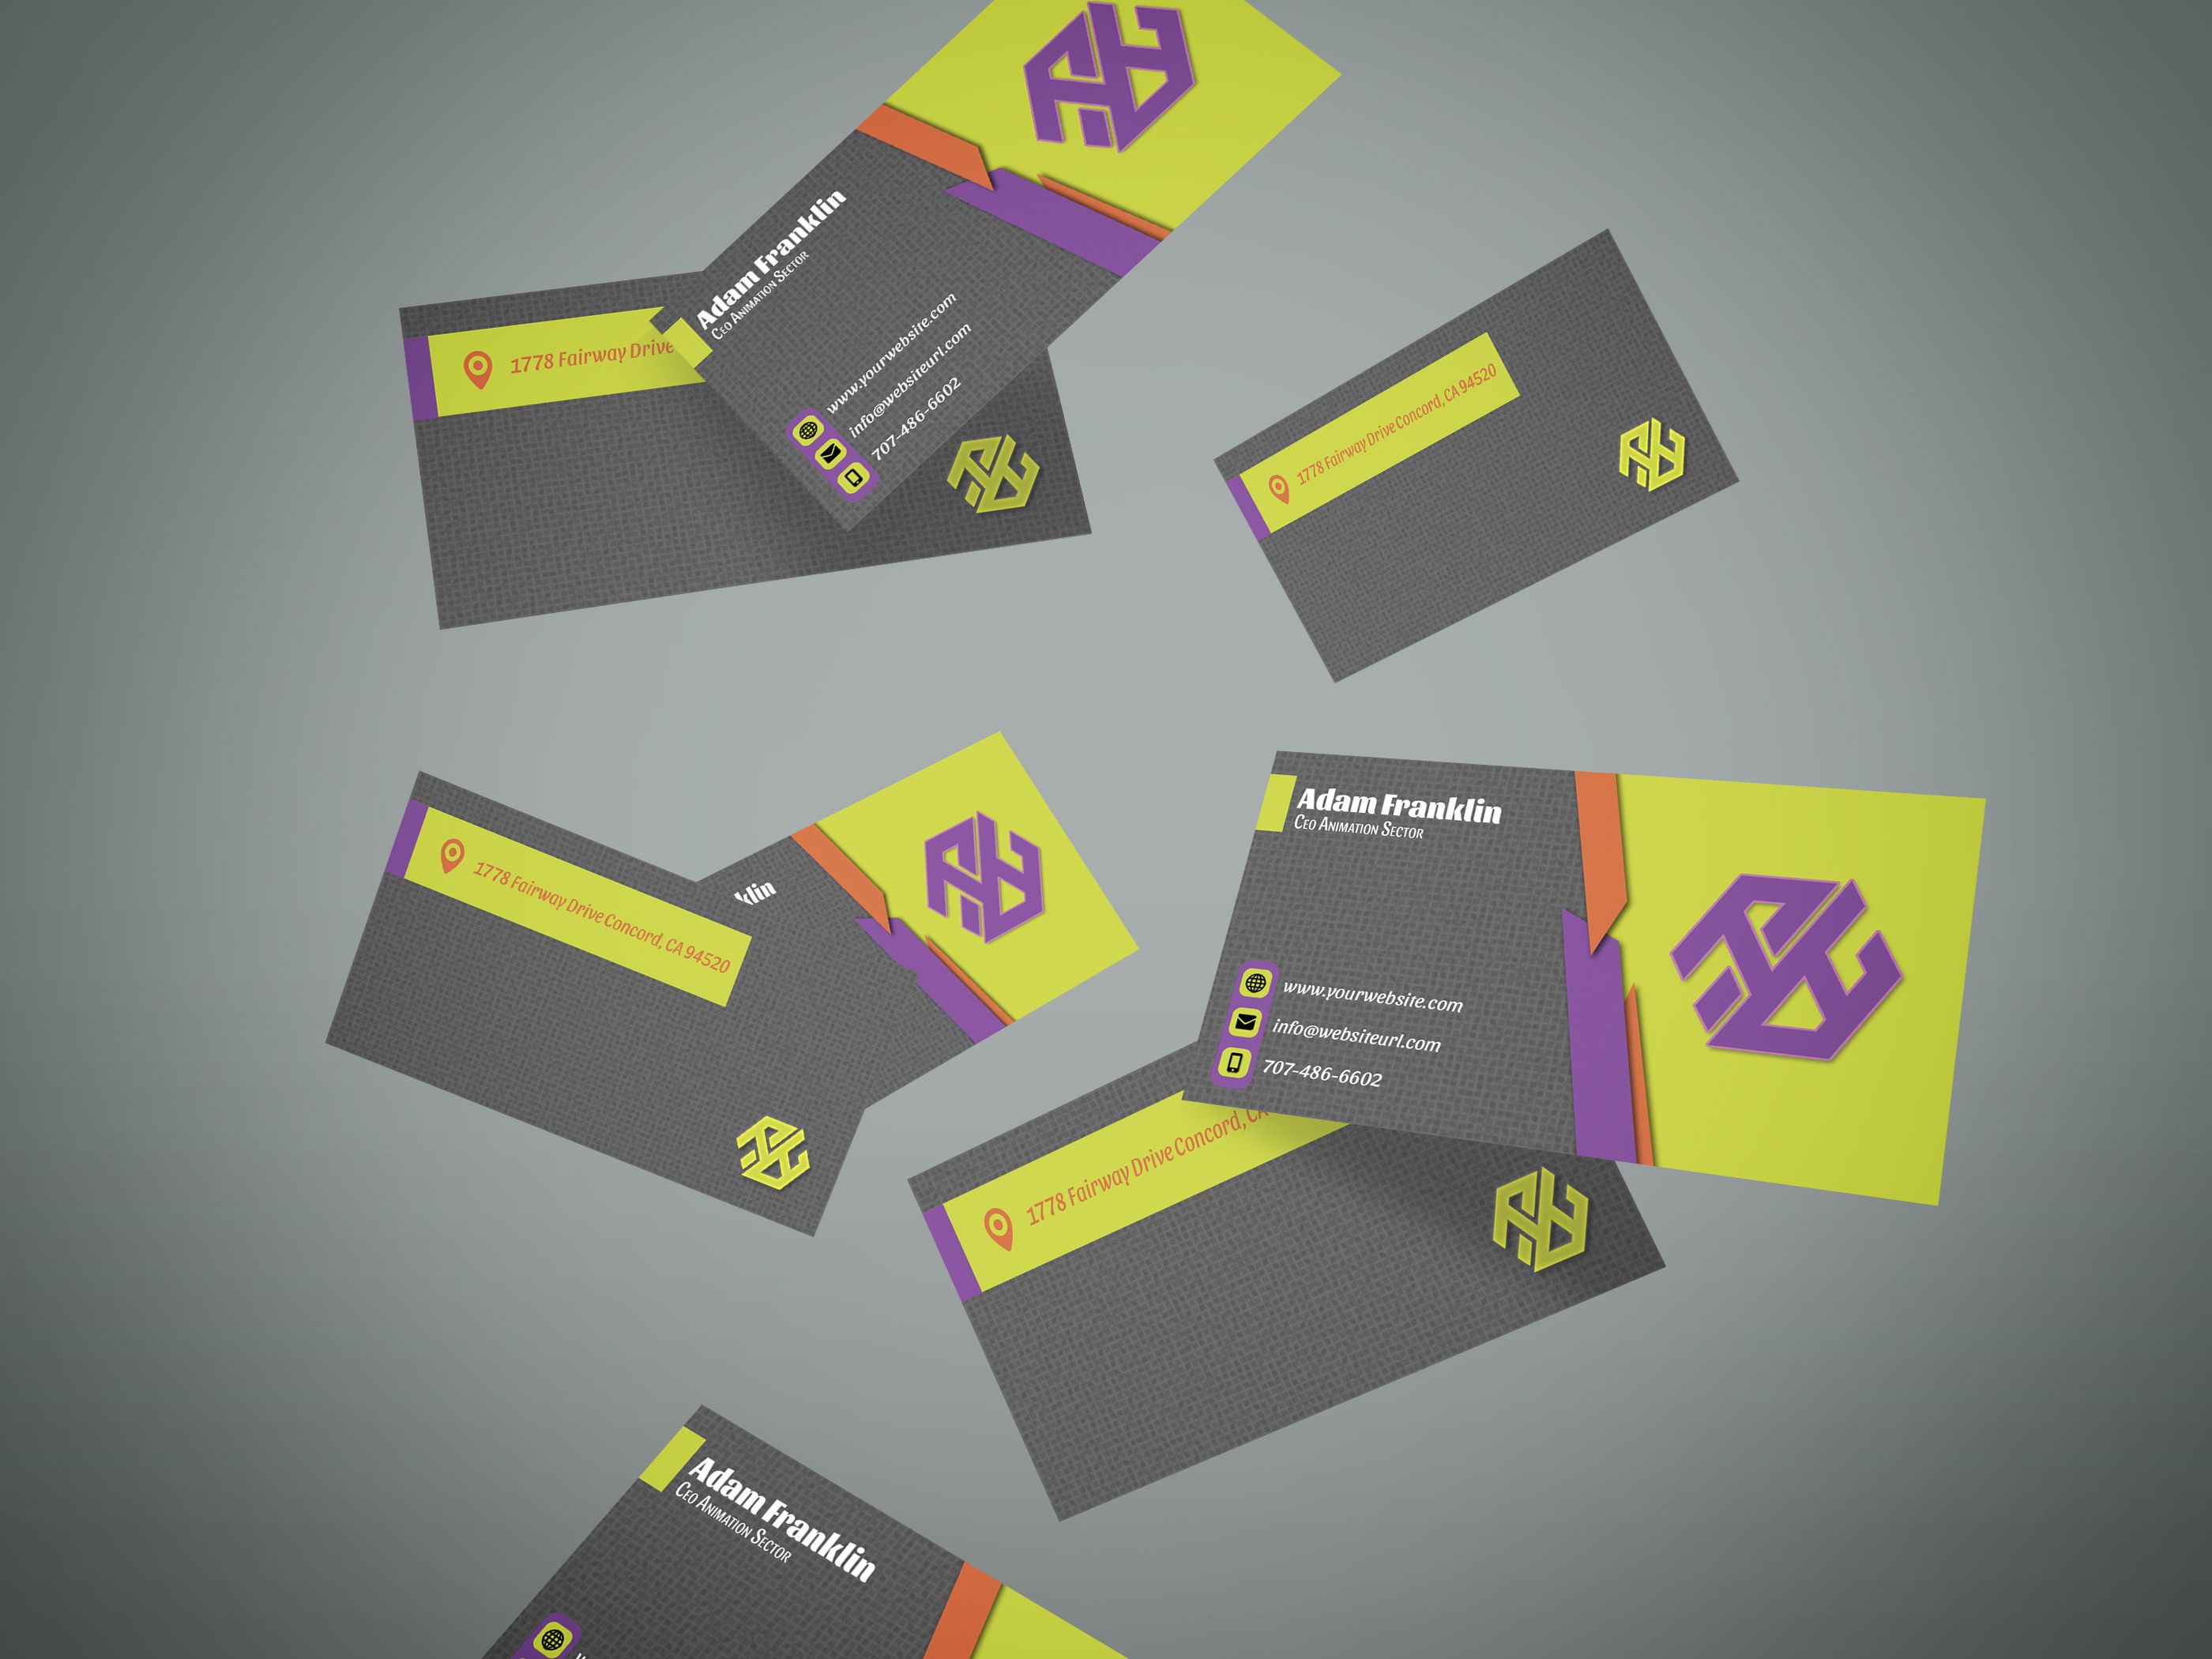 Minimal Creative Business Card Template Flying Cards Example.